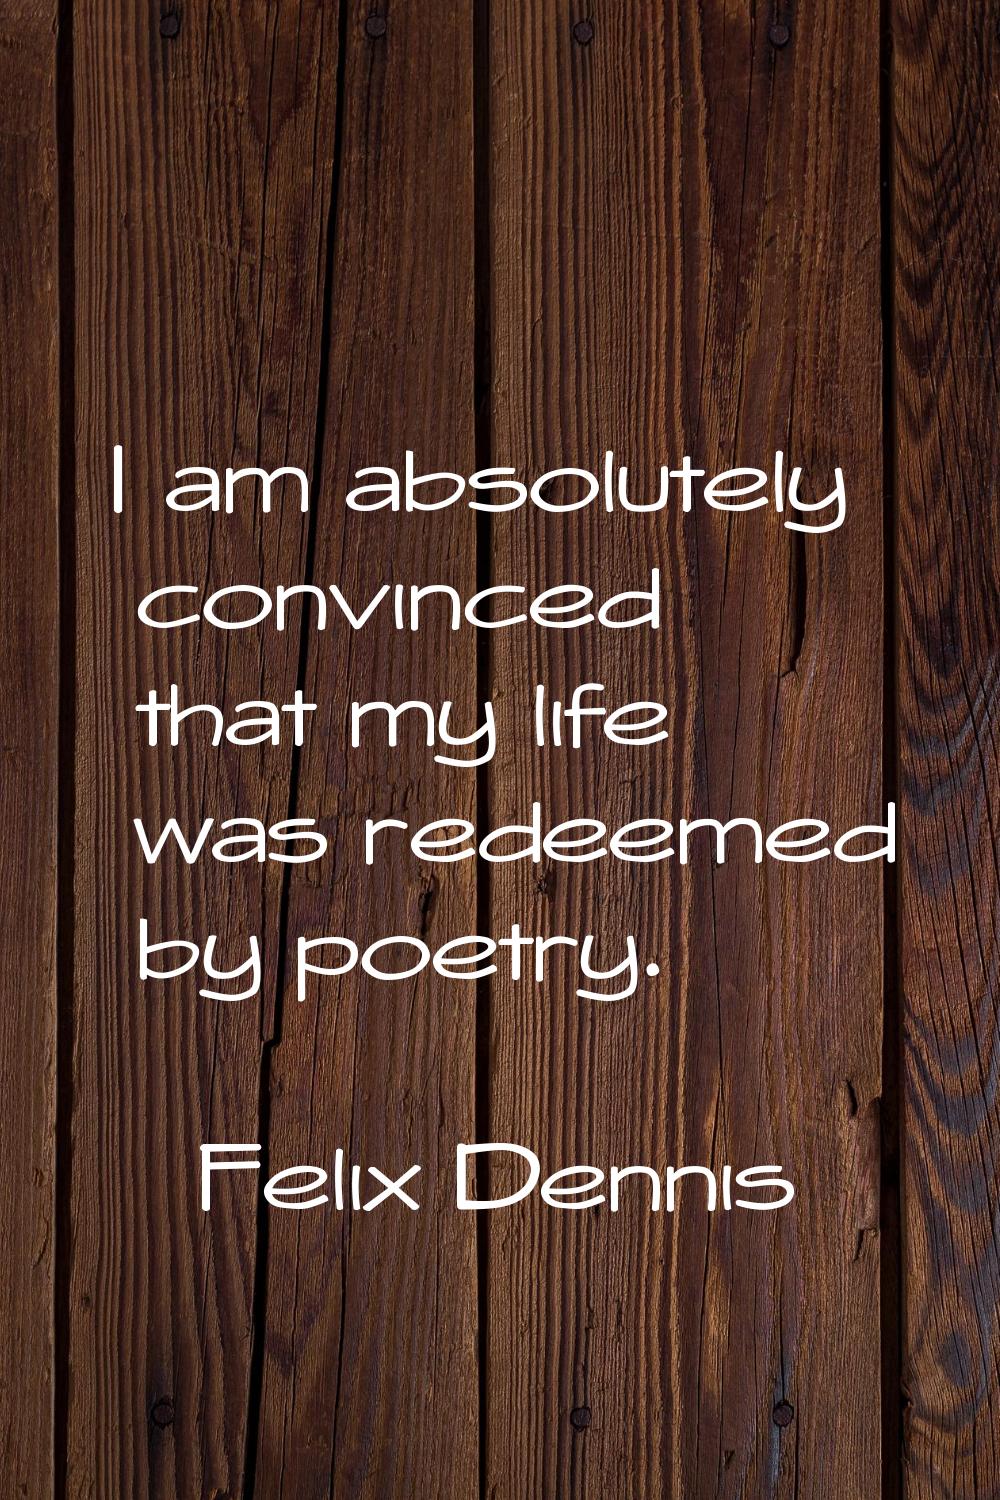 I am absolutely convinced that my life was redeemed by poetry.